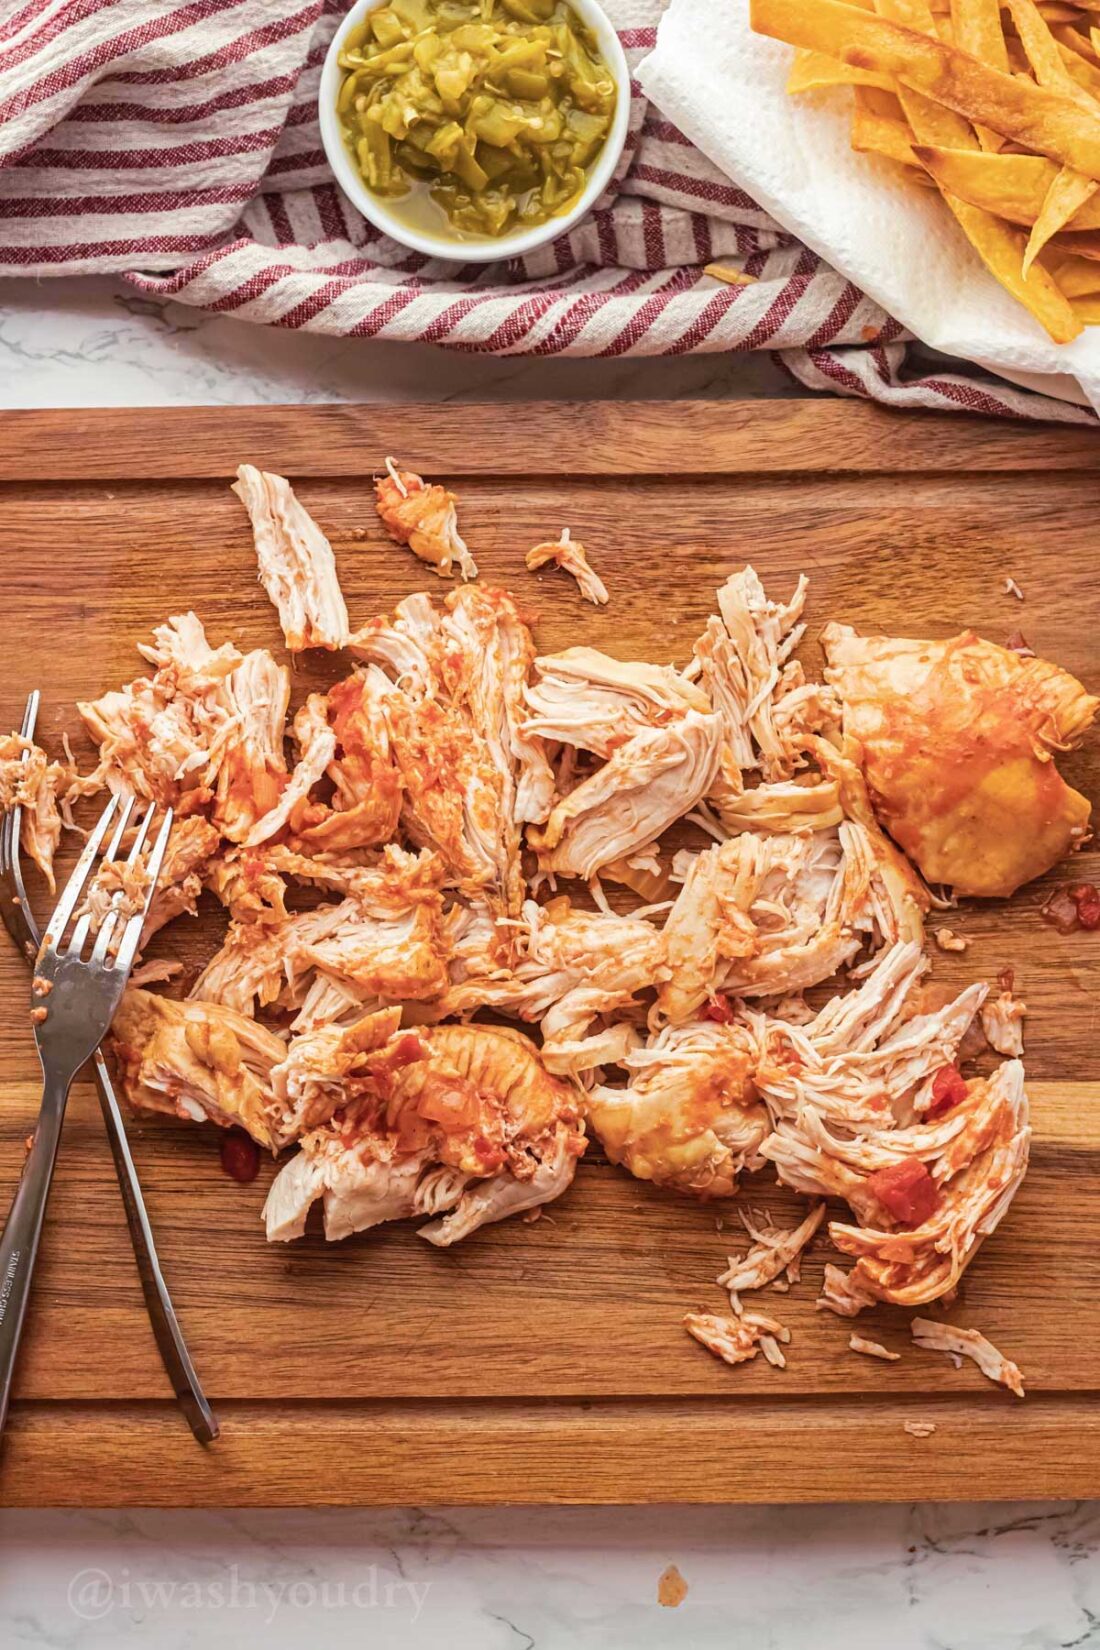 Shredded cooked chicken on wood cutting board. 